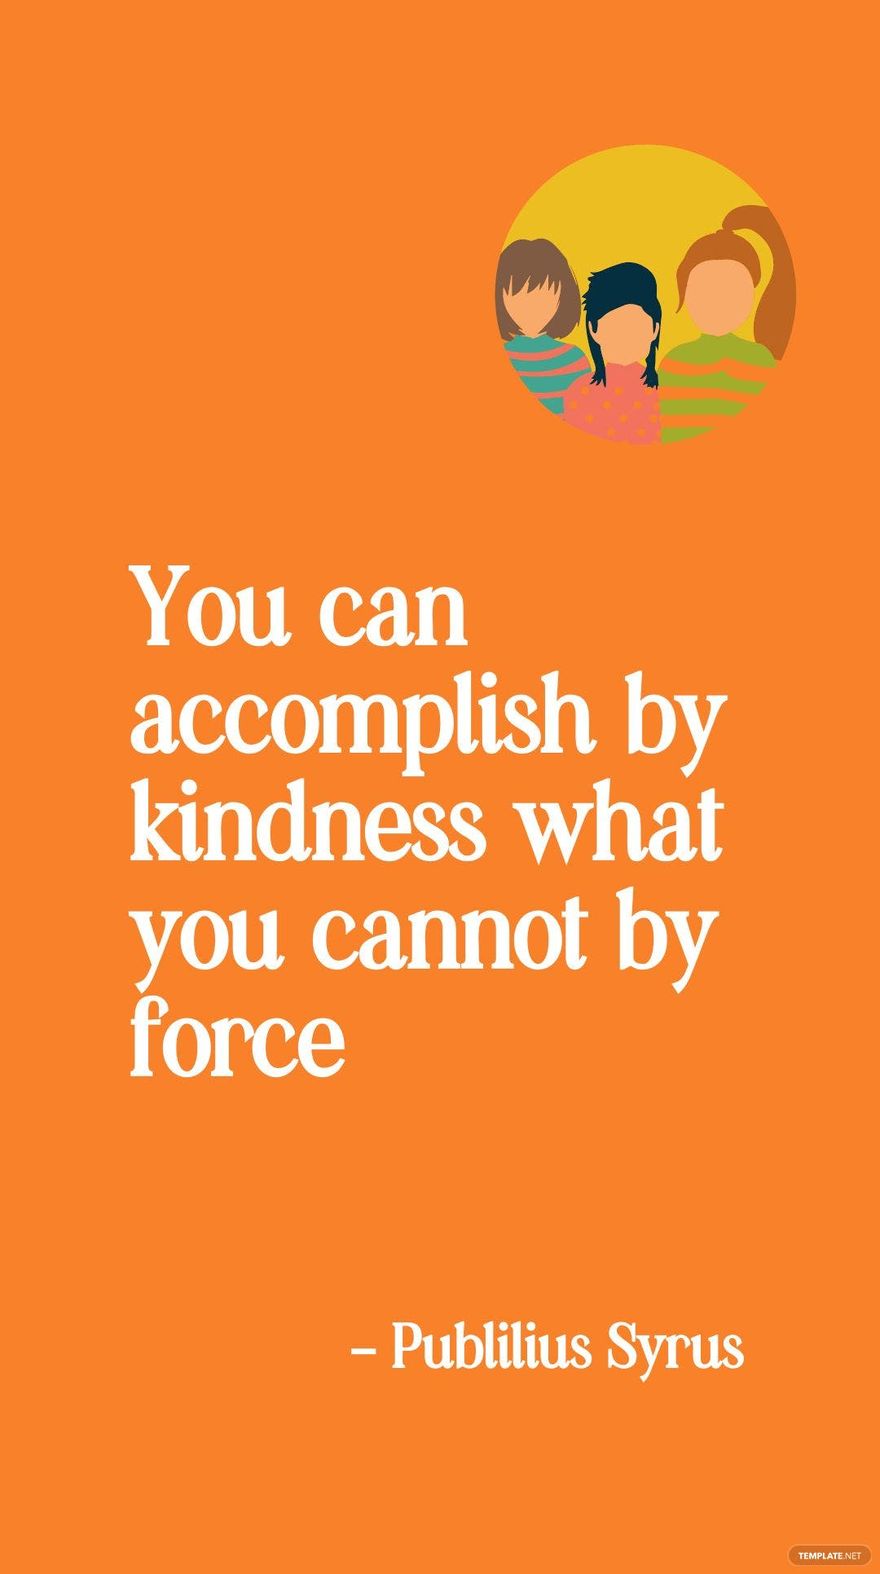 Publilius Syrus - You can accomplish by kindness what you cannot by force